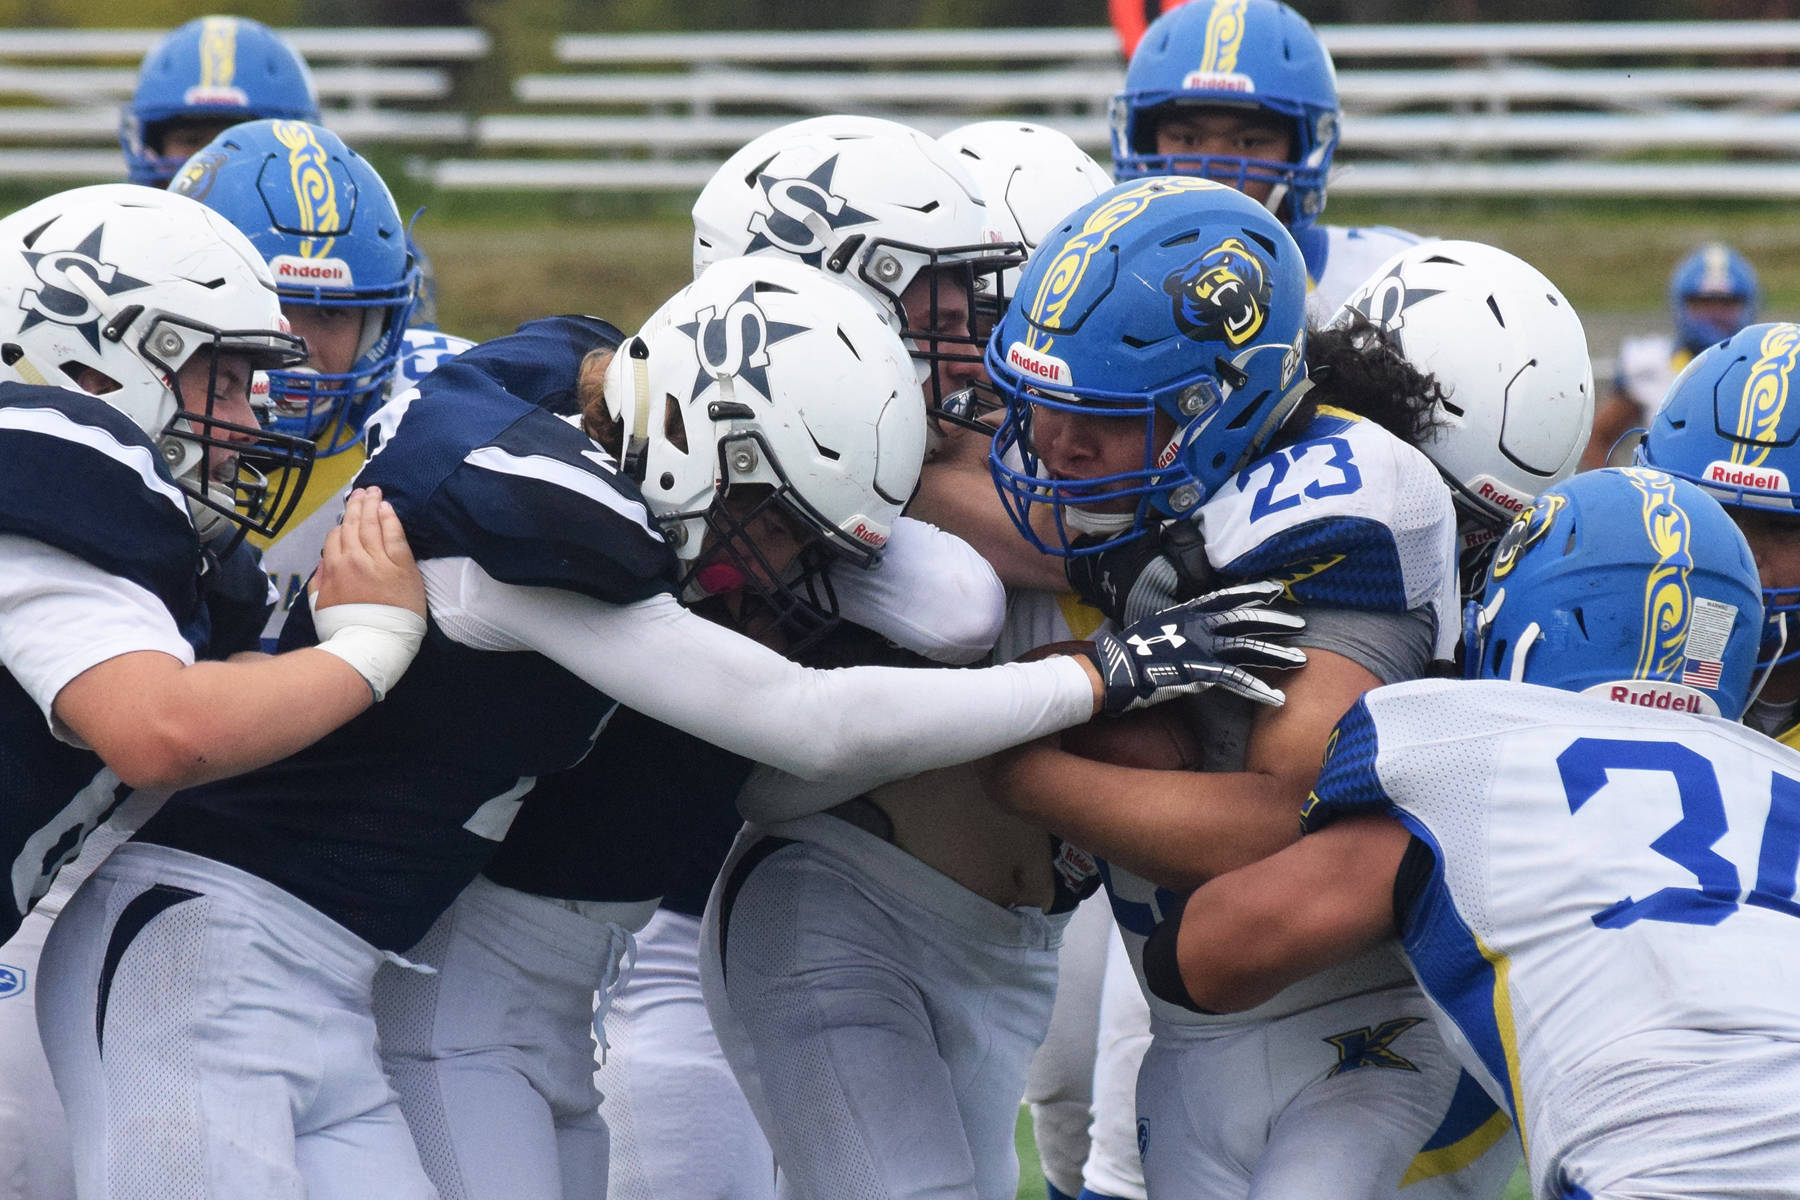 SoHi football routs Kodiak for 1st NLC win of year